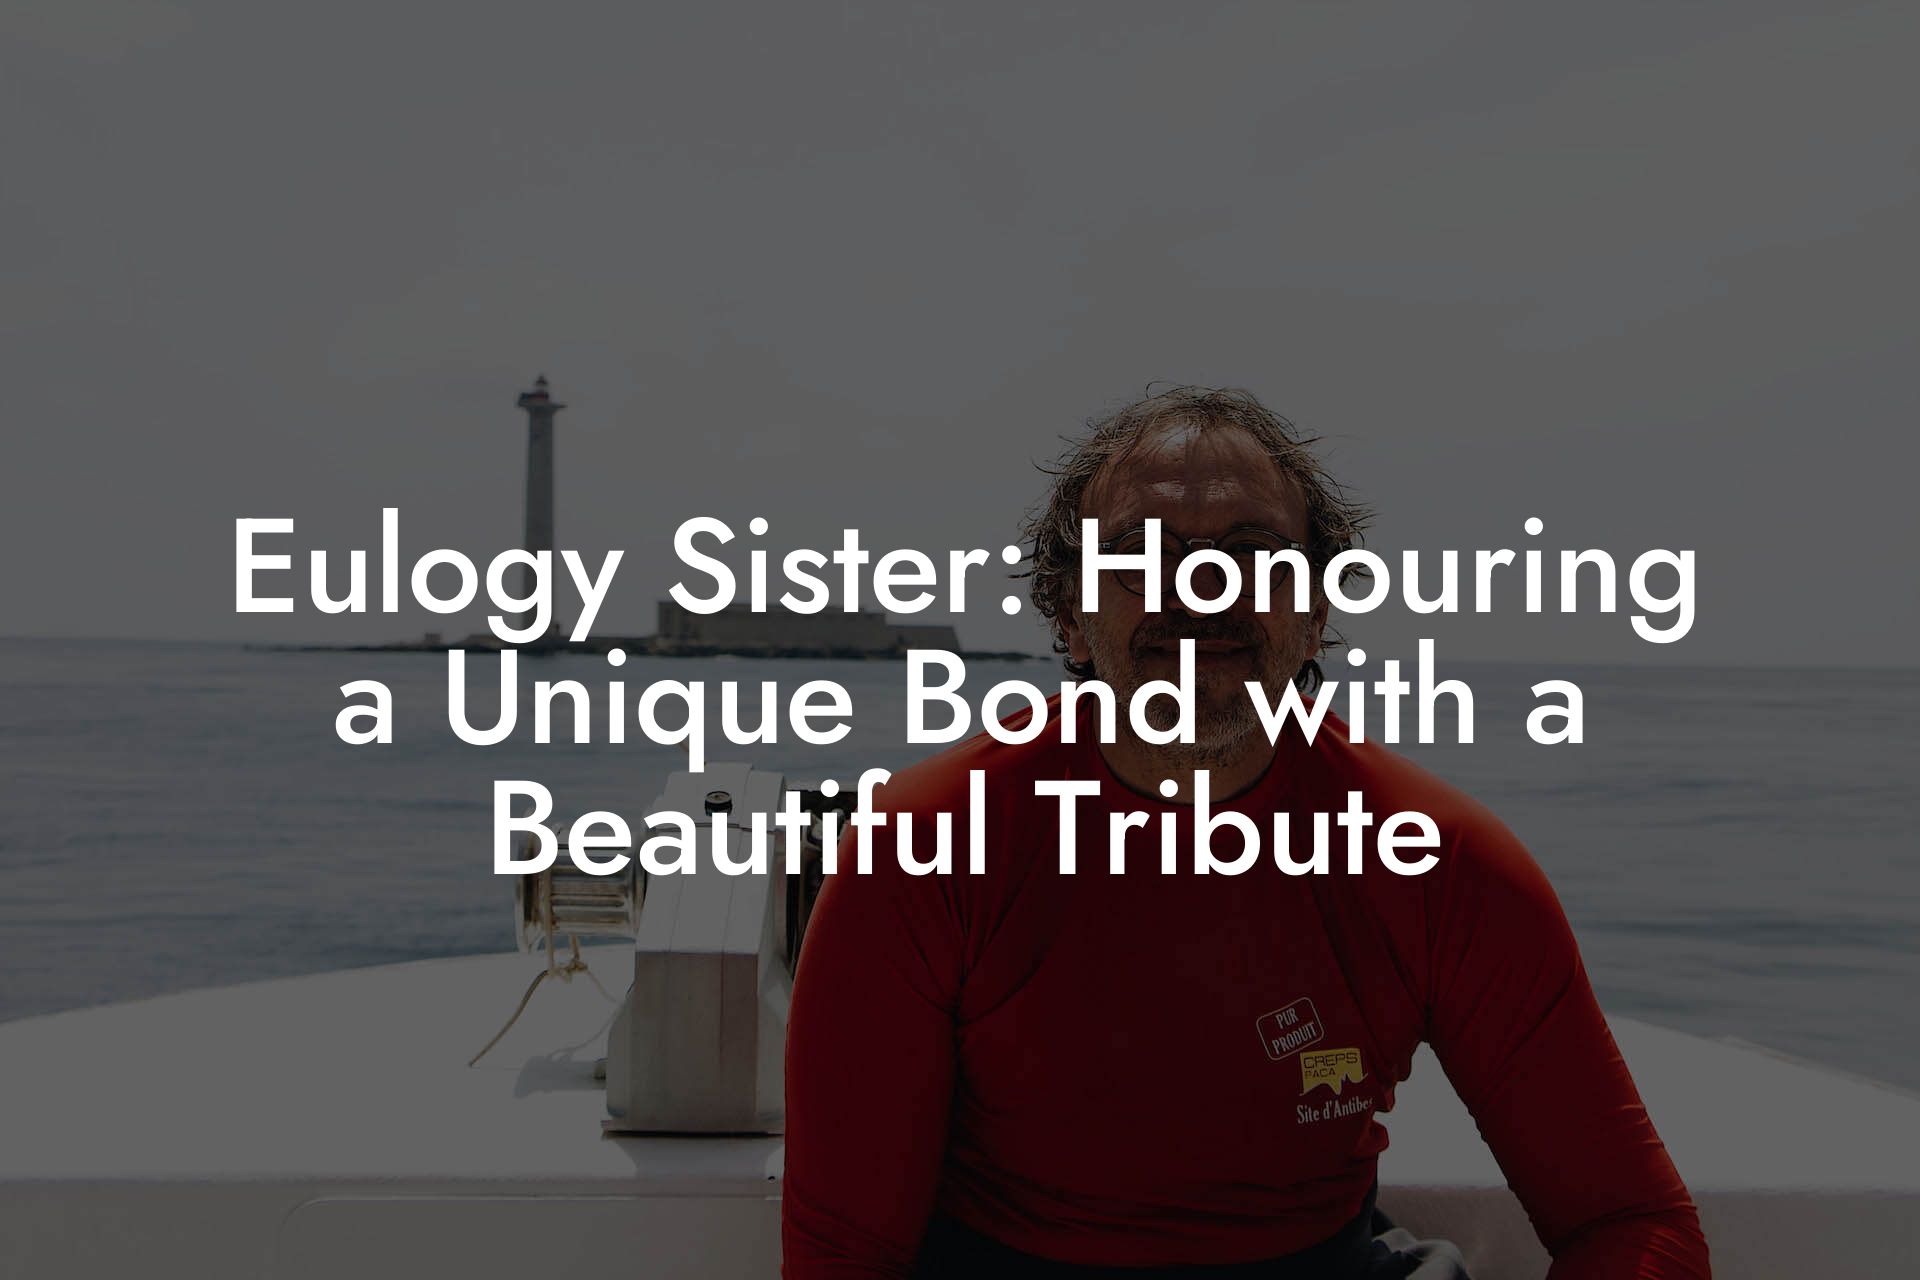 Eulogy Sister: Honouring a Unique Bond with a Beautiful Tribute